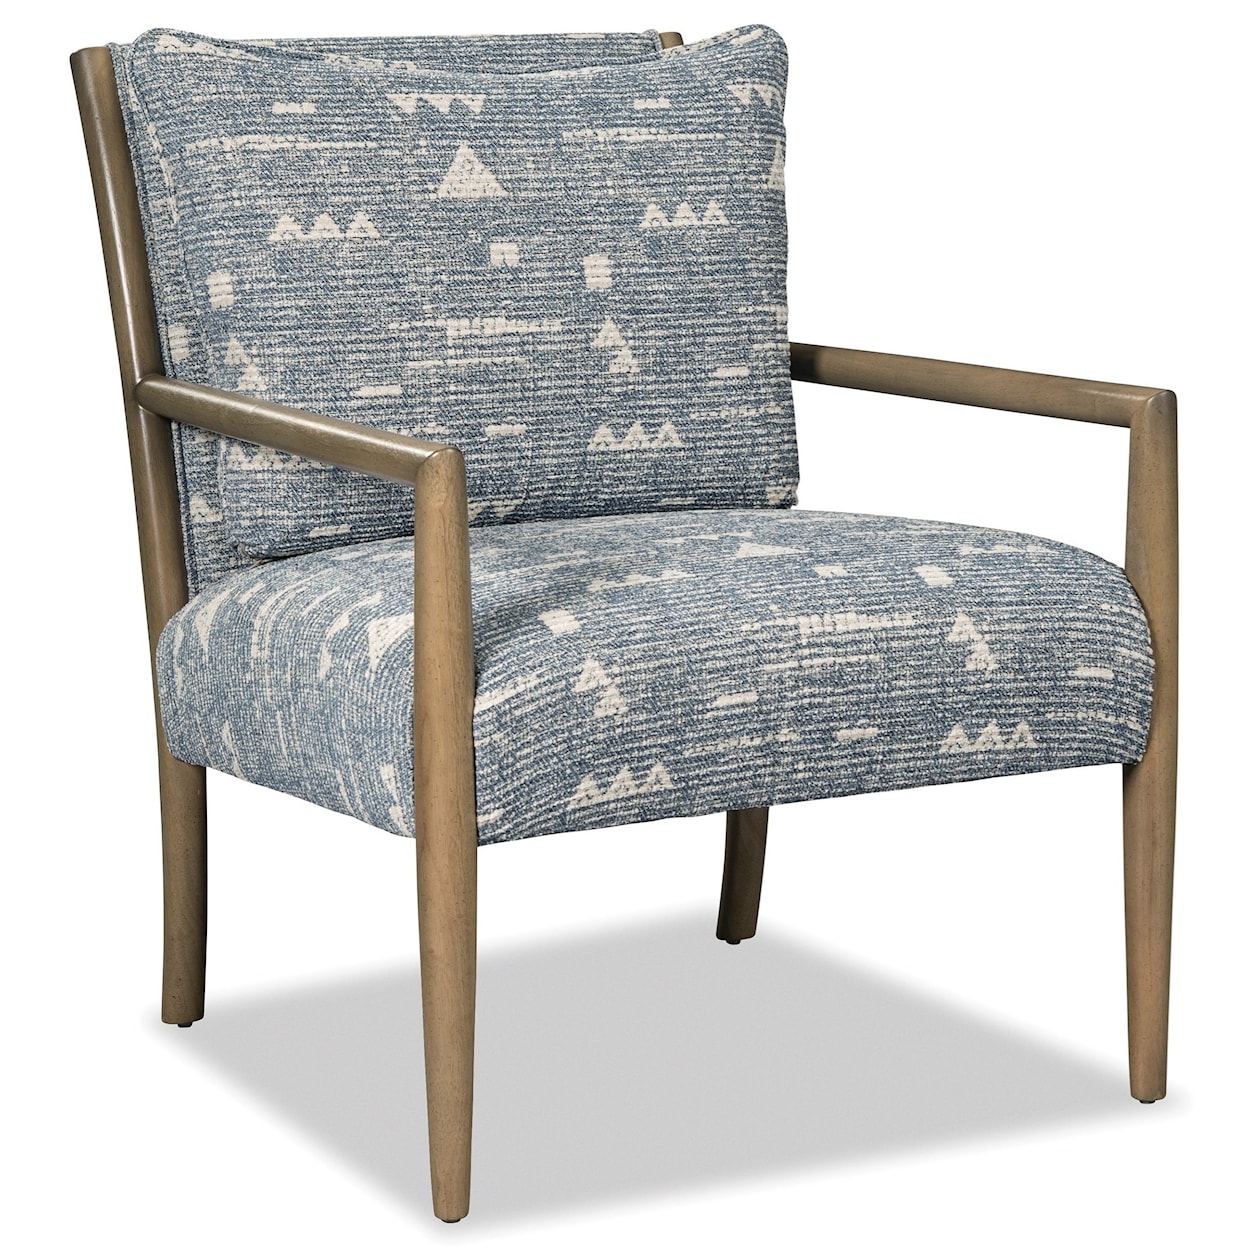 Craftmaster 082210 Accent Chair